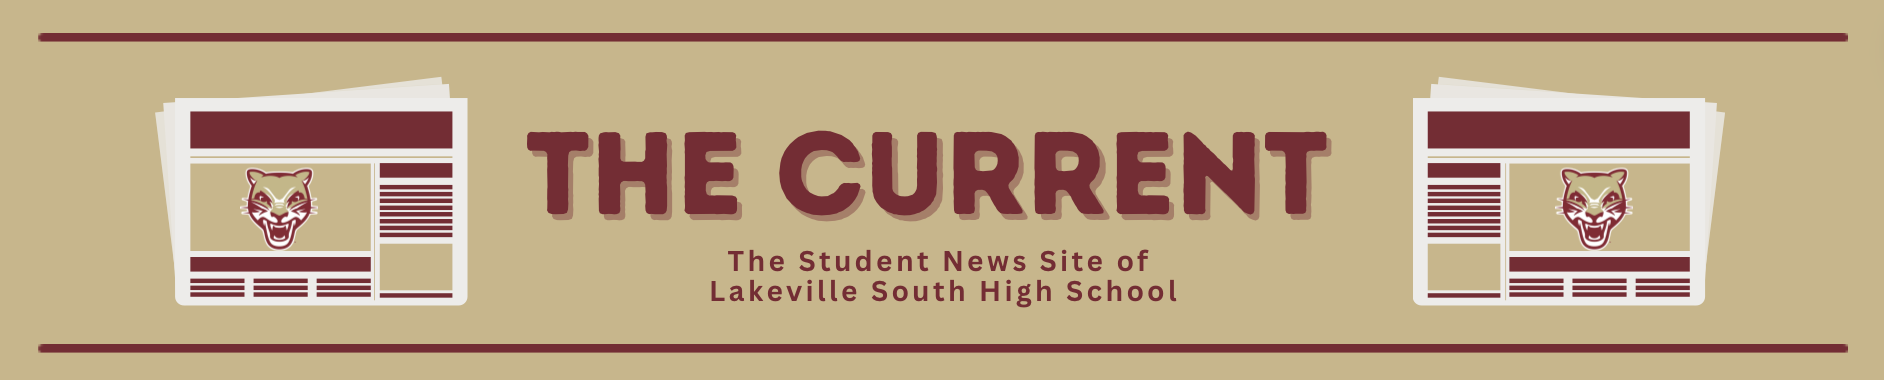 The Student News Site of Lakeville South High School